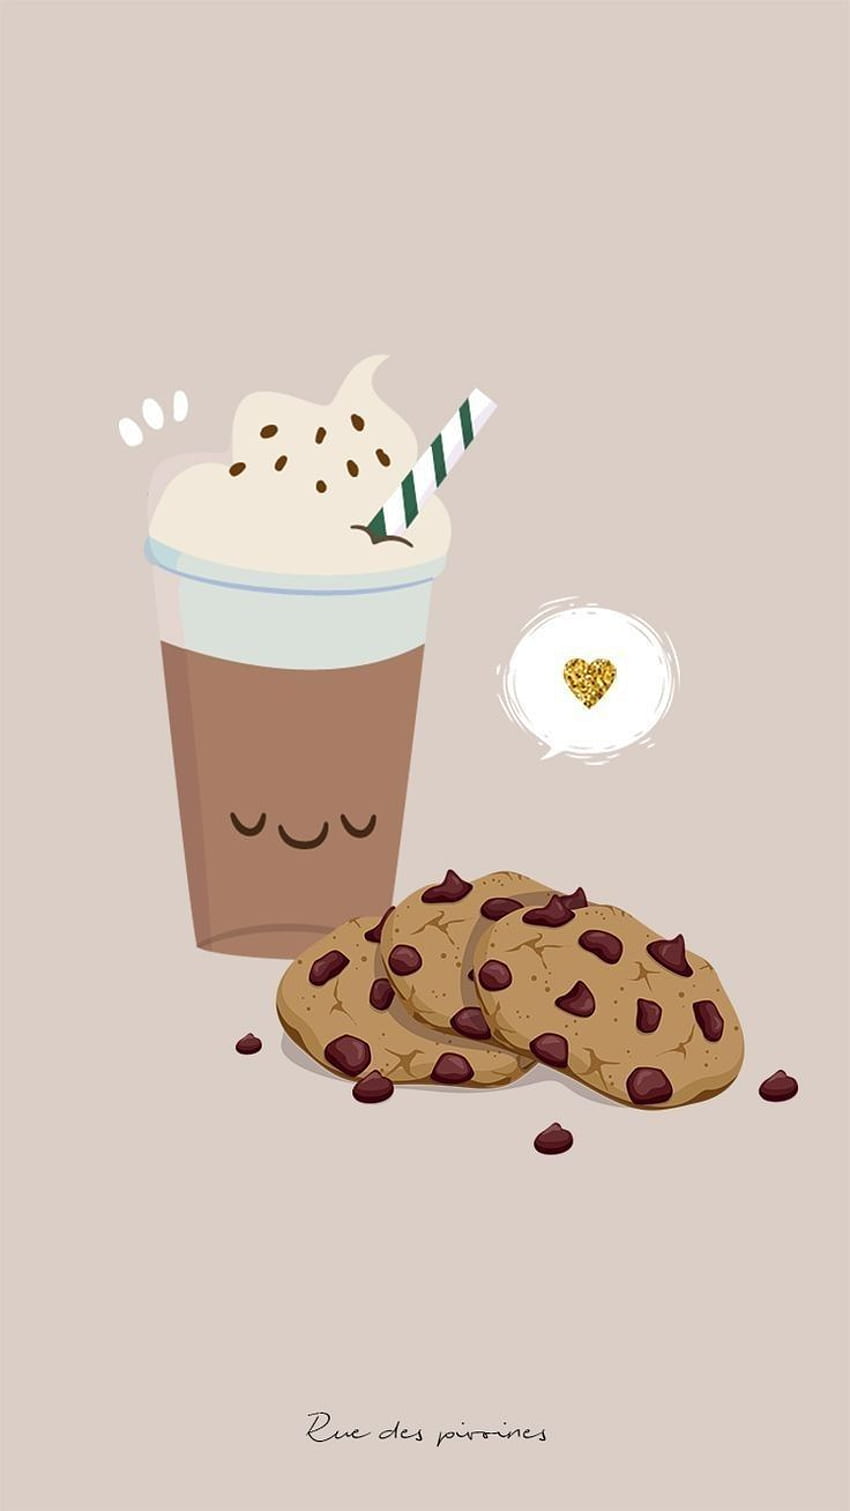 Mobile Wallpaper With Cute Cartoon Of Cookie Background Wallpaper Image For  Free Download  Pngtree